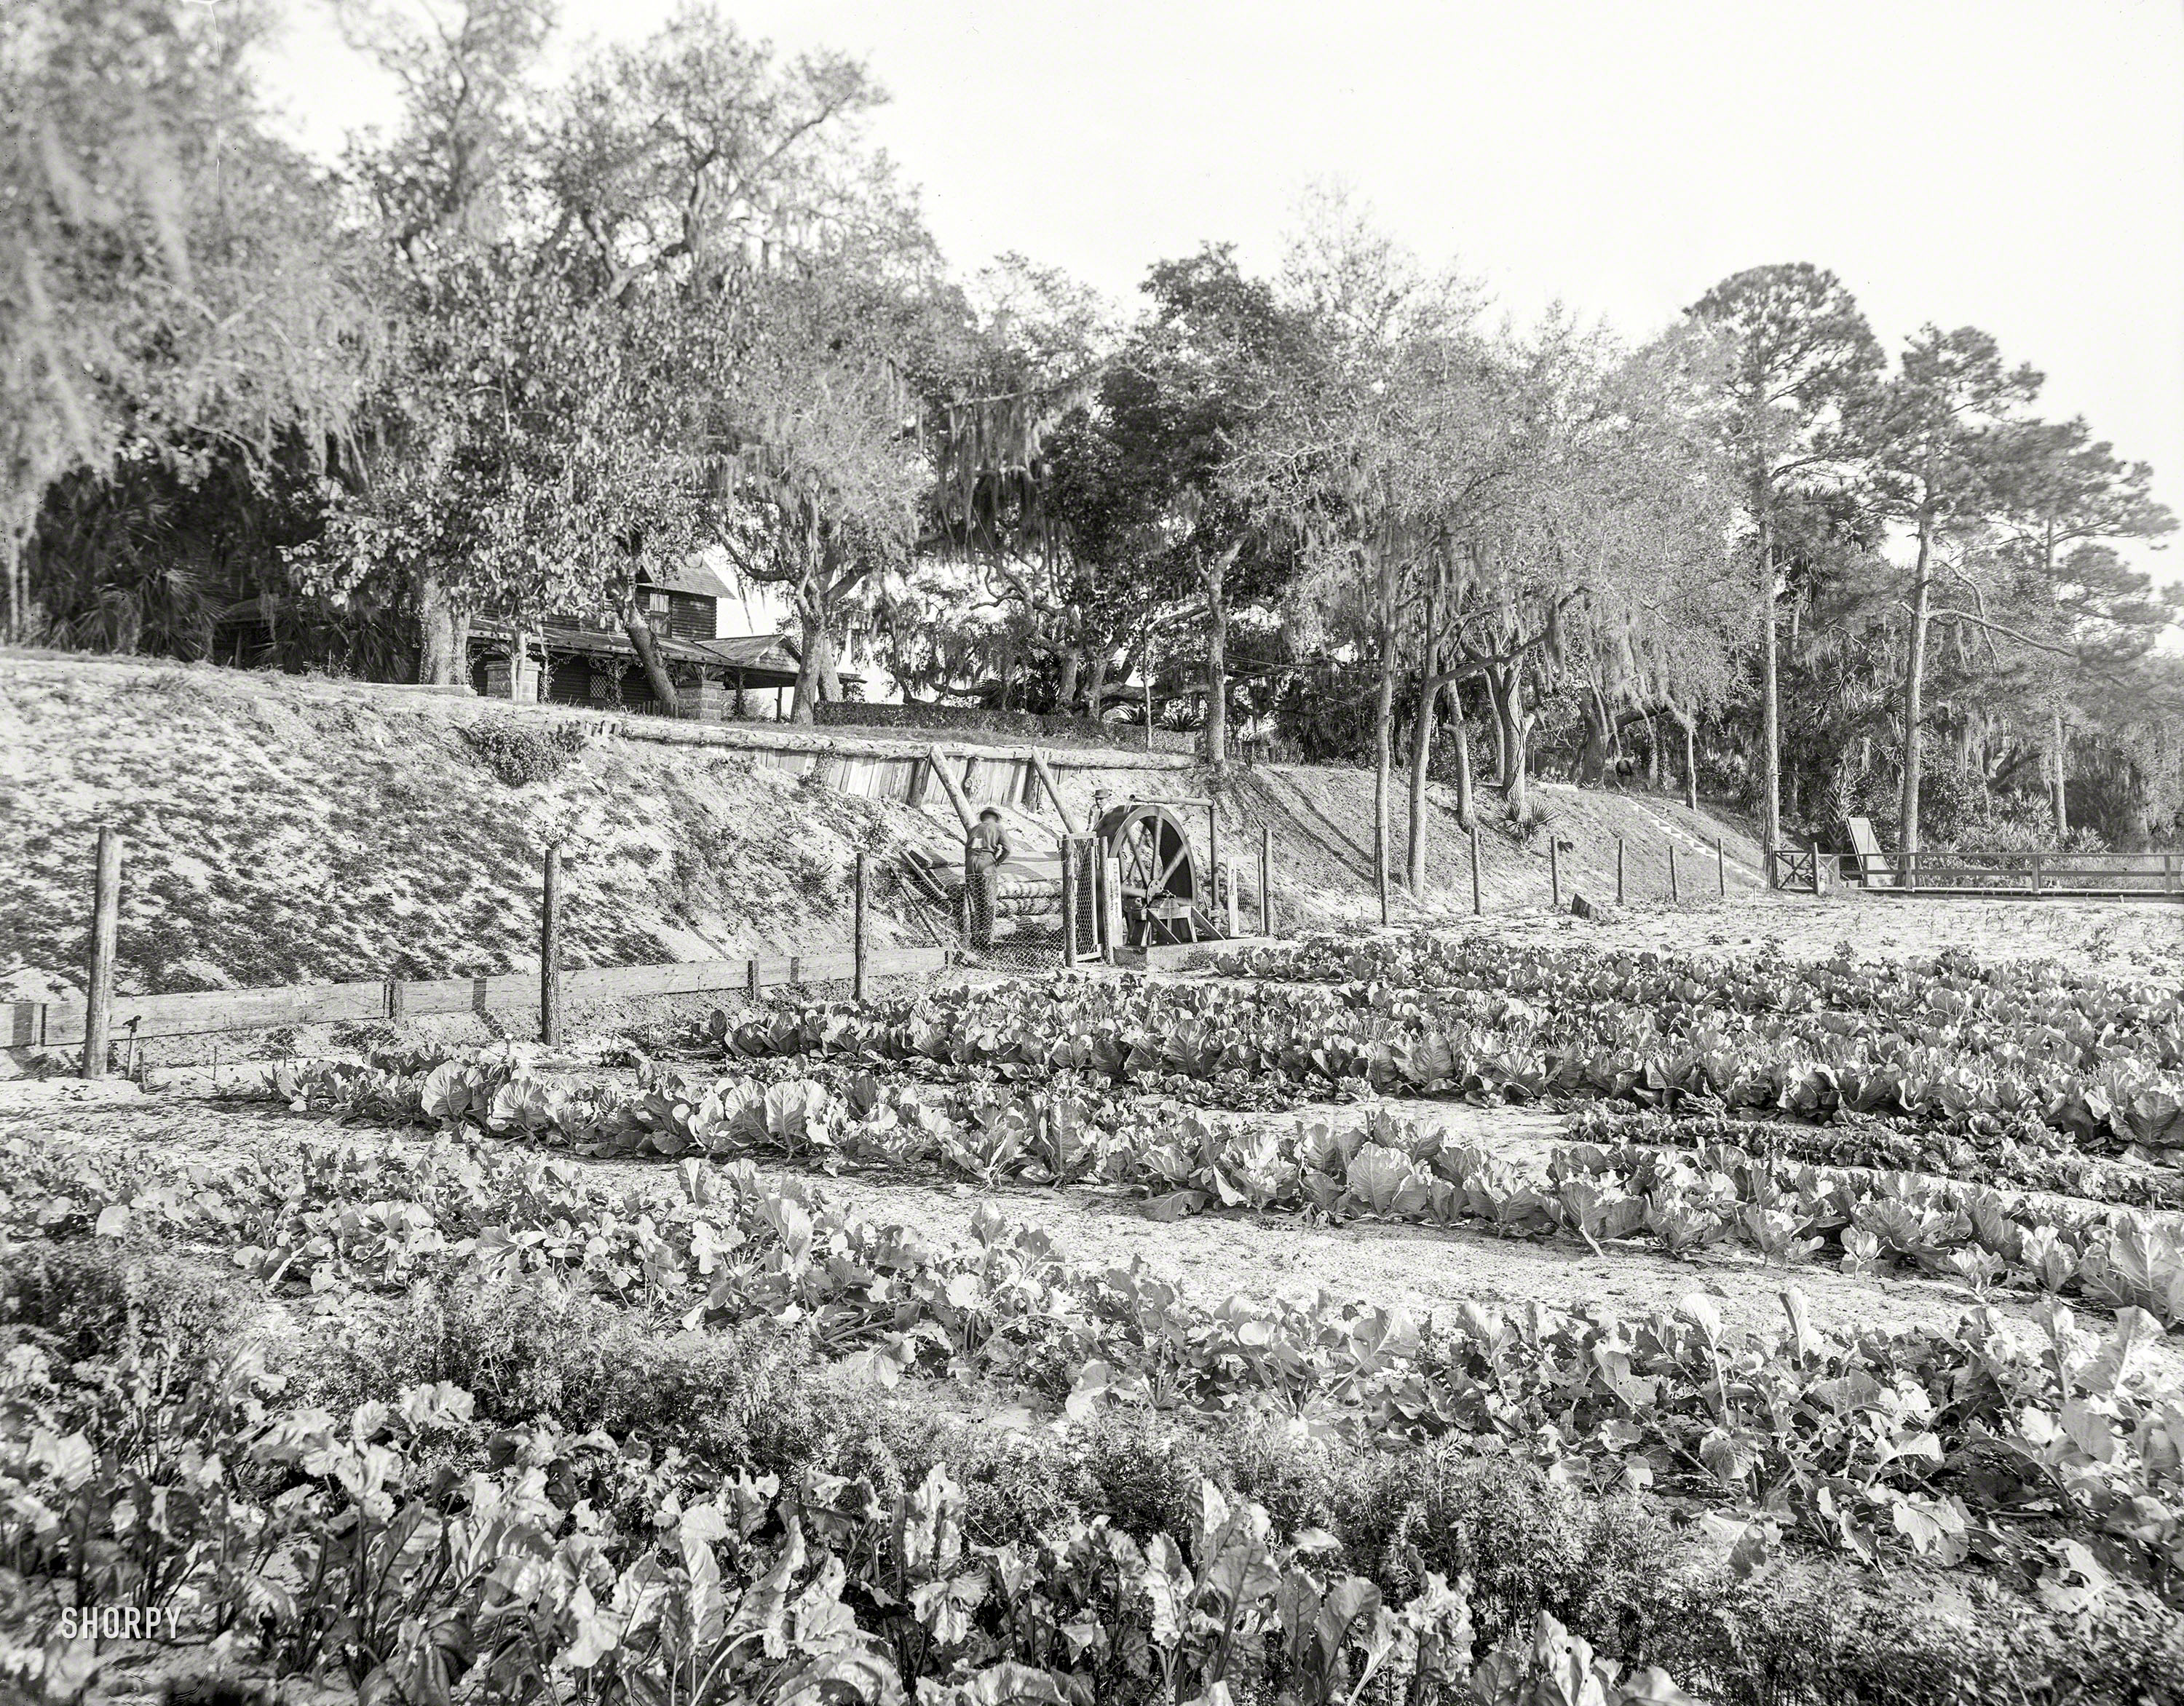 Volusia County, Florida, circa 1903. "Artesian well pumping water for irrigation at Ormond." 8x10 glass negative, Detroit Publishing Company. View full size.